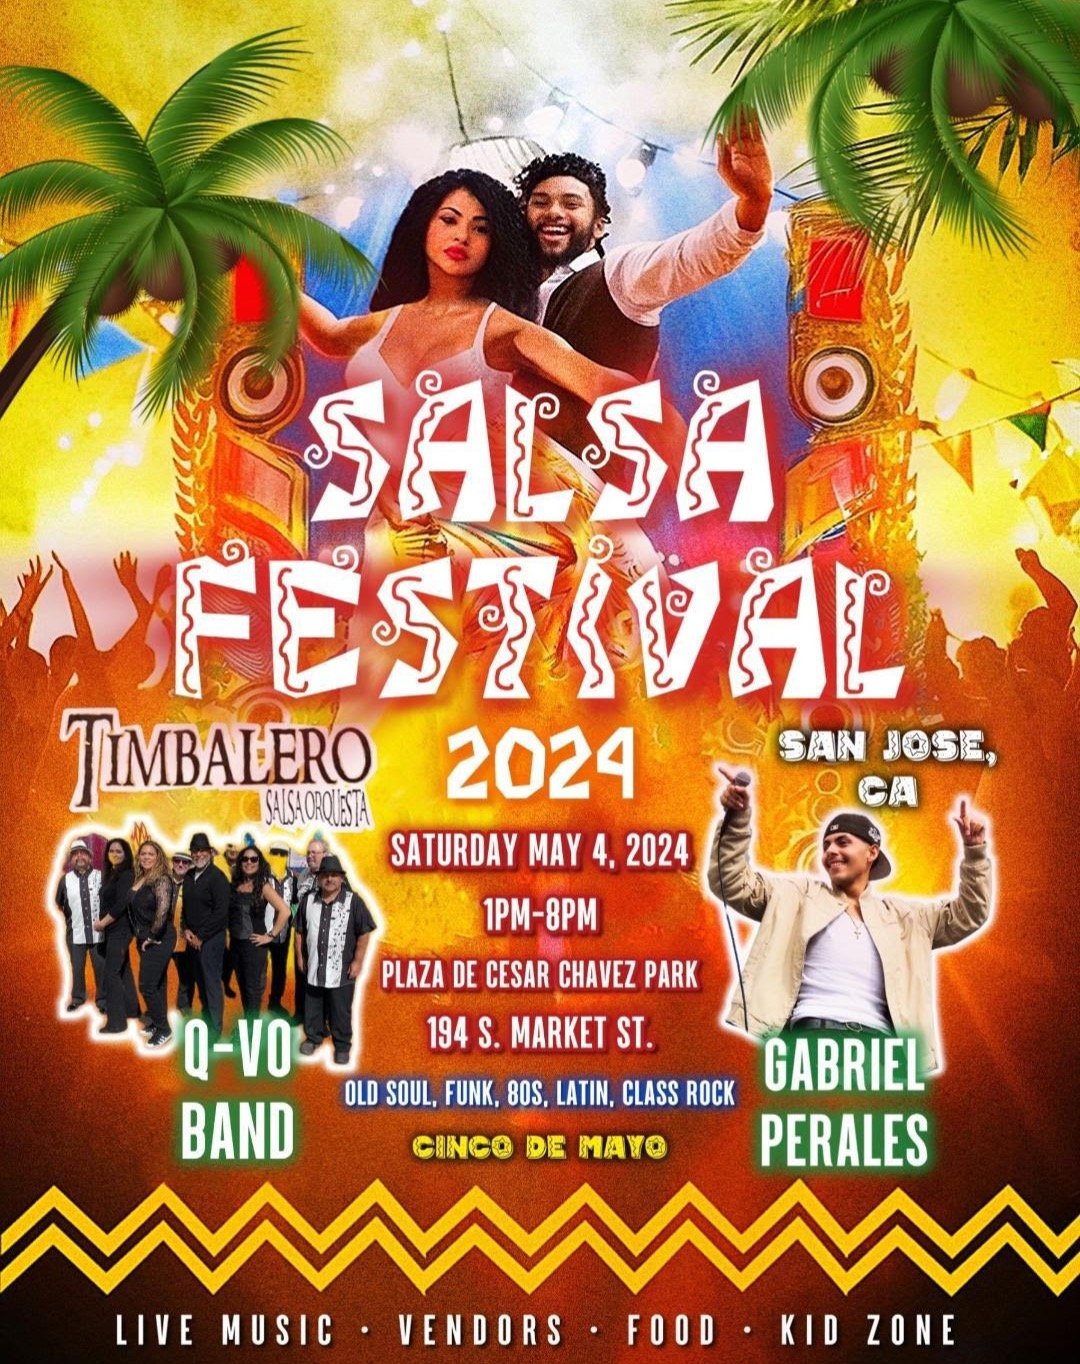 Hey everyone! This May 4th, Loaves and Fishes will be at the Salsa Festival! Come join us for a day filled with incredible music, delicious food, and dancing! Can't wait to see you there!